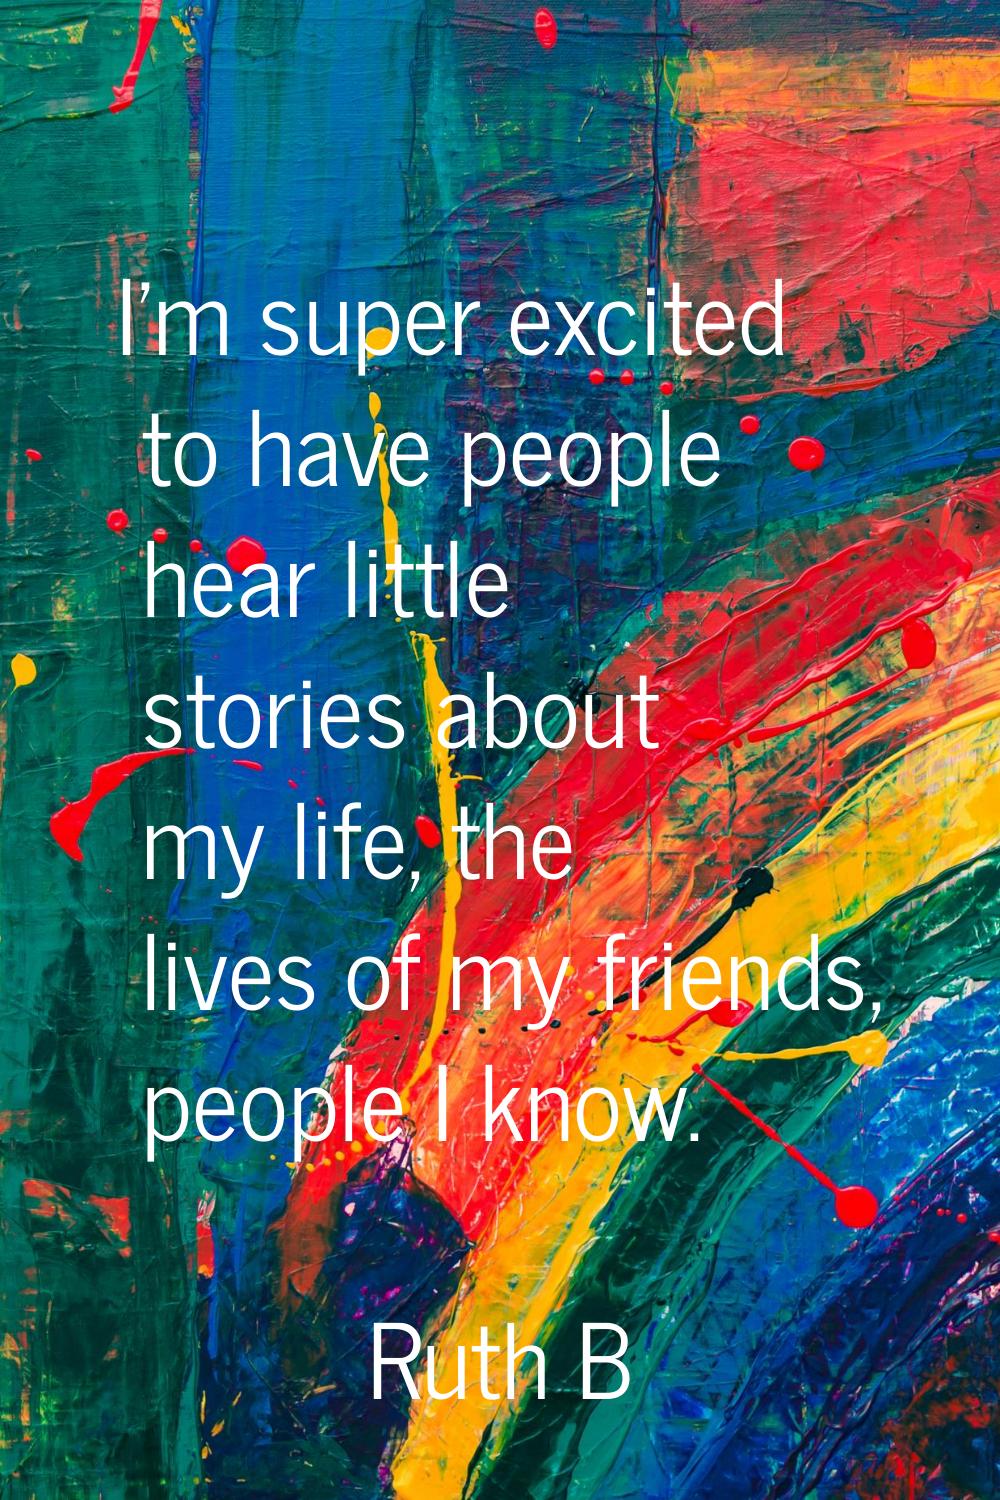 I'm super excited to have people hear little stories about my life, the lives of my friends, people